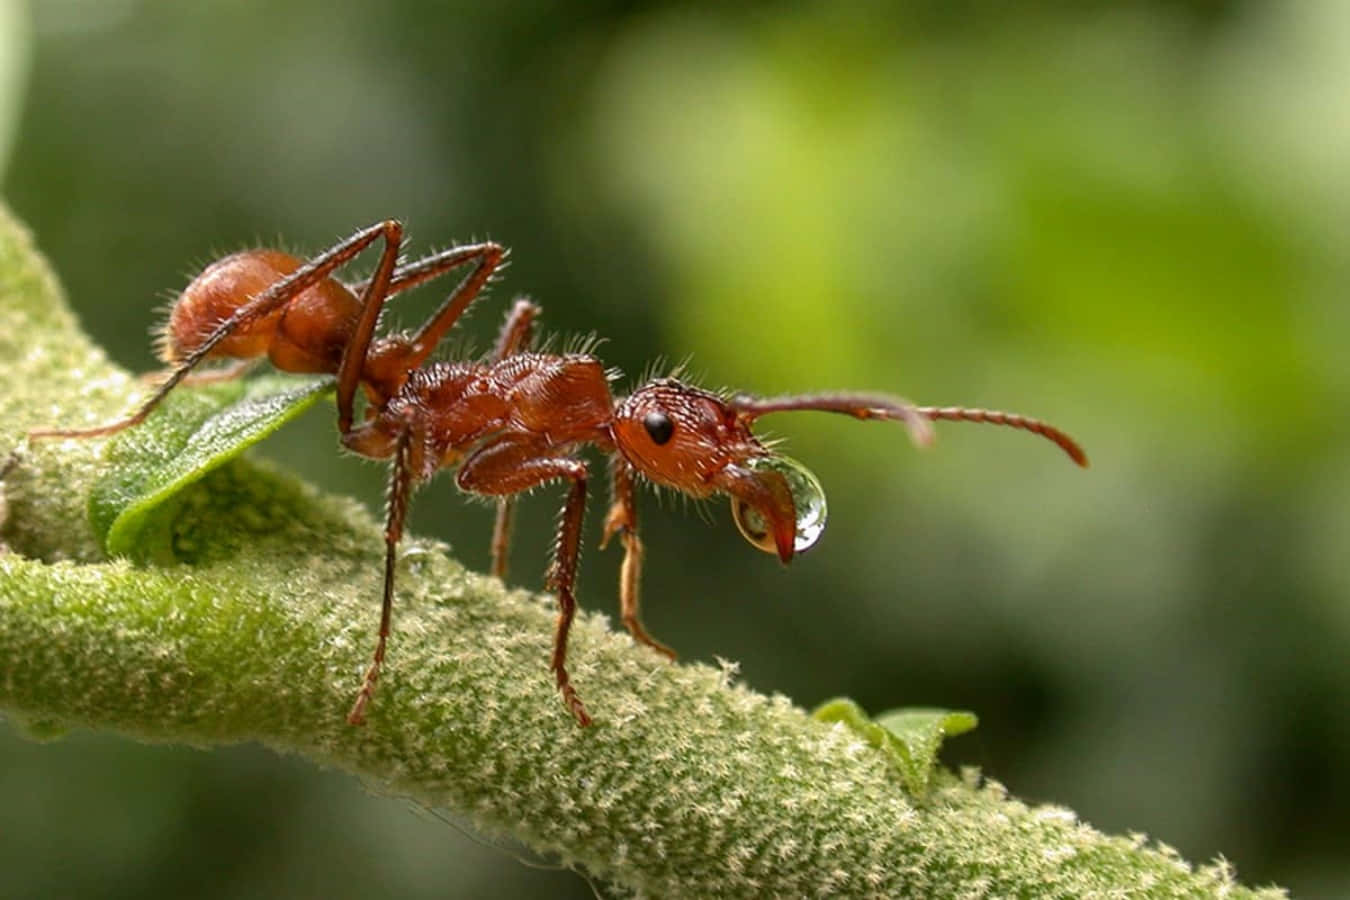 Leafcutter Ants on the Move